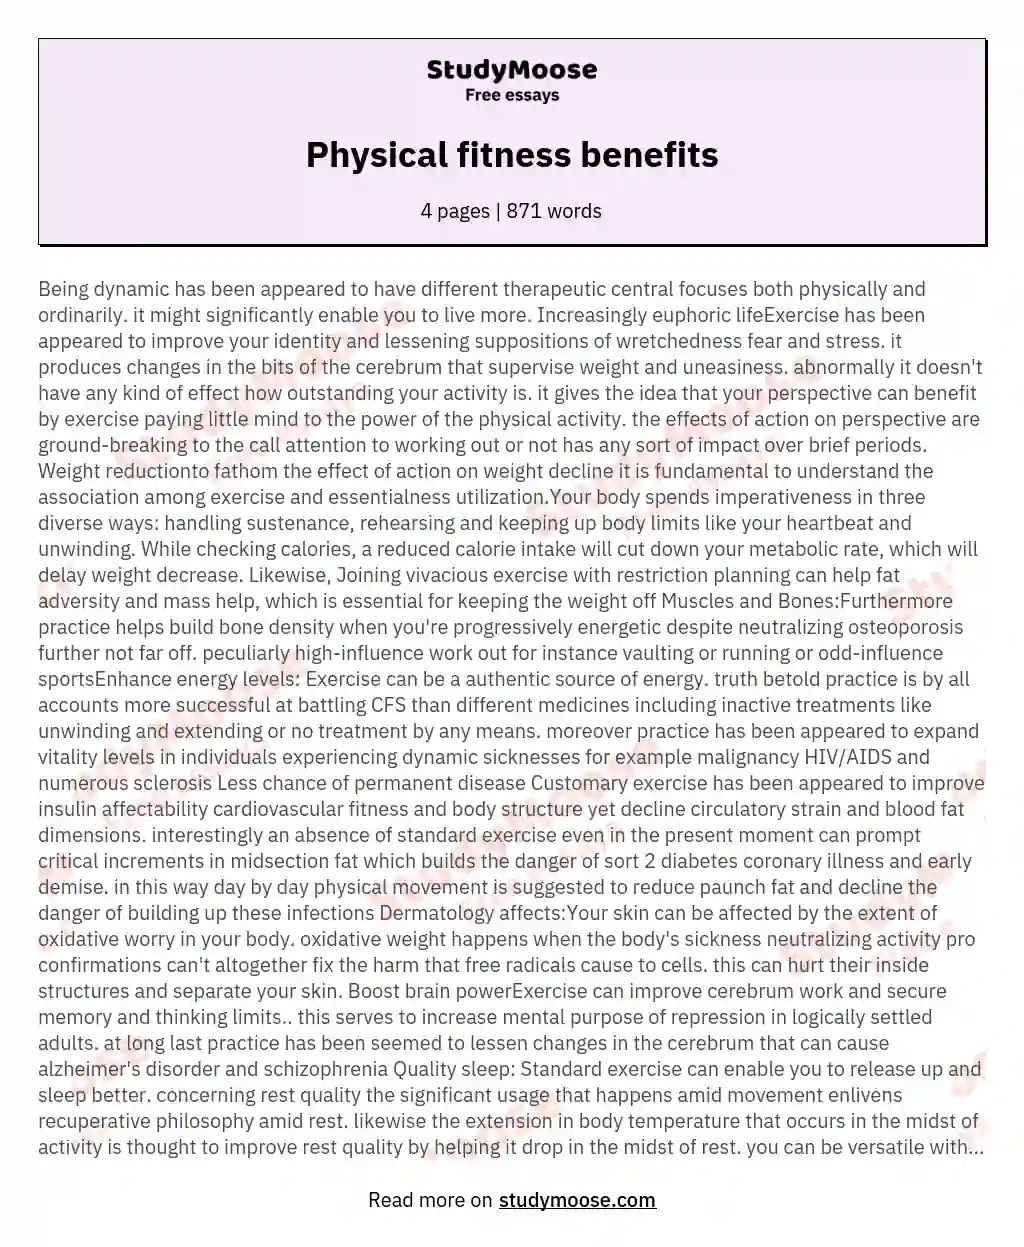 Physical fitness benefits